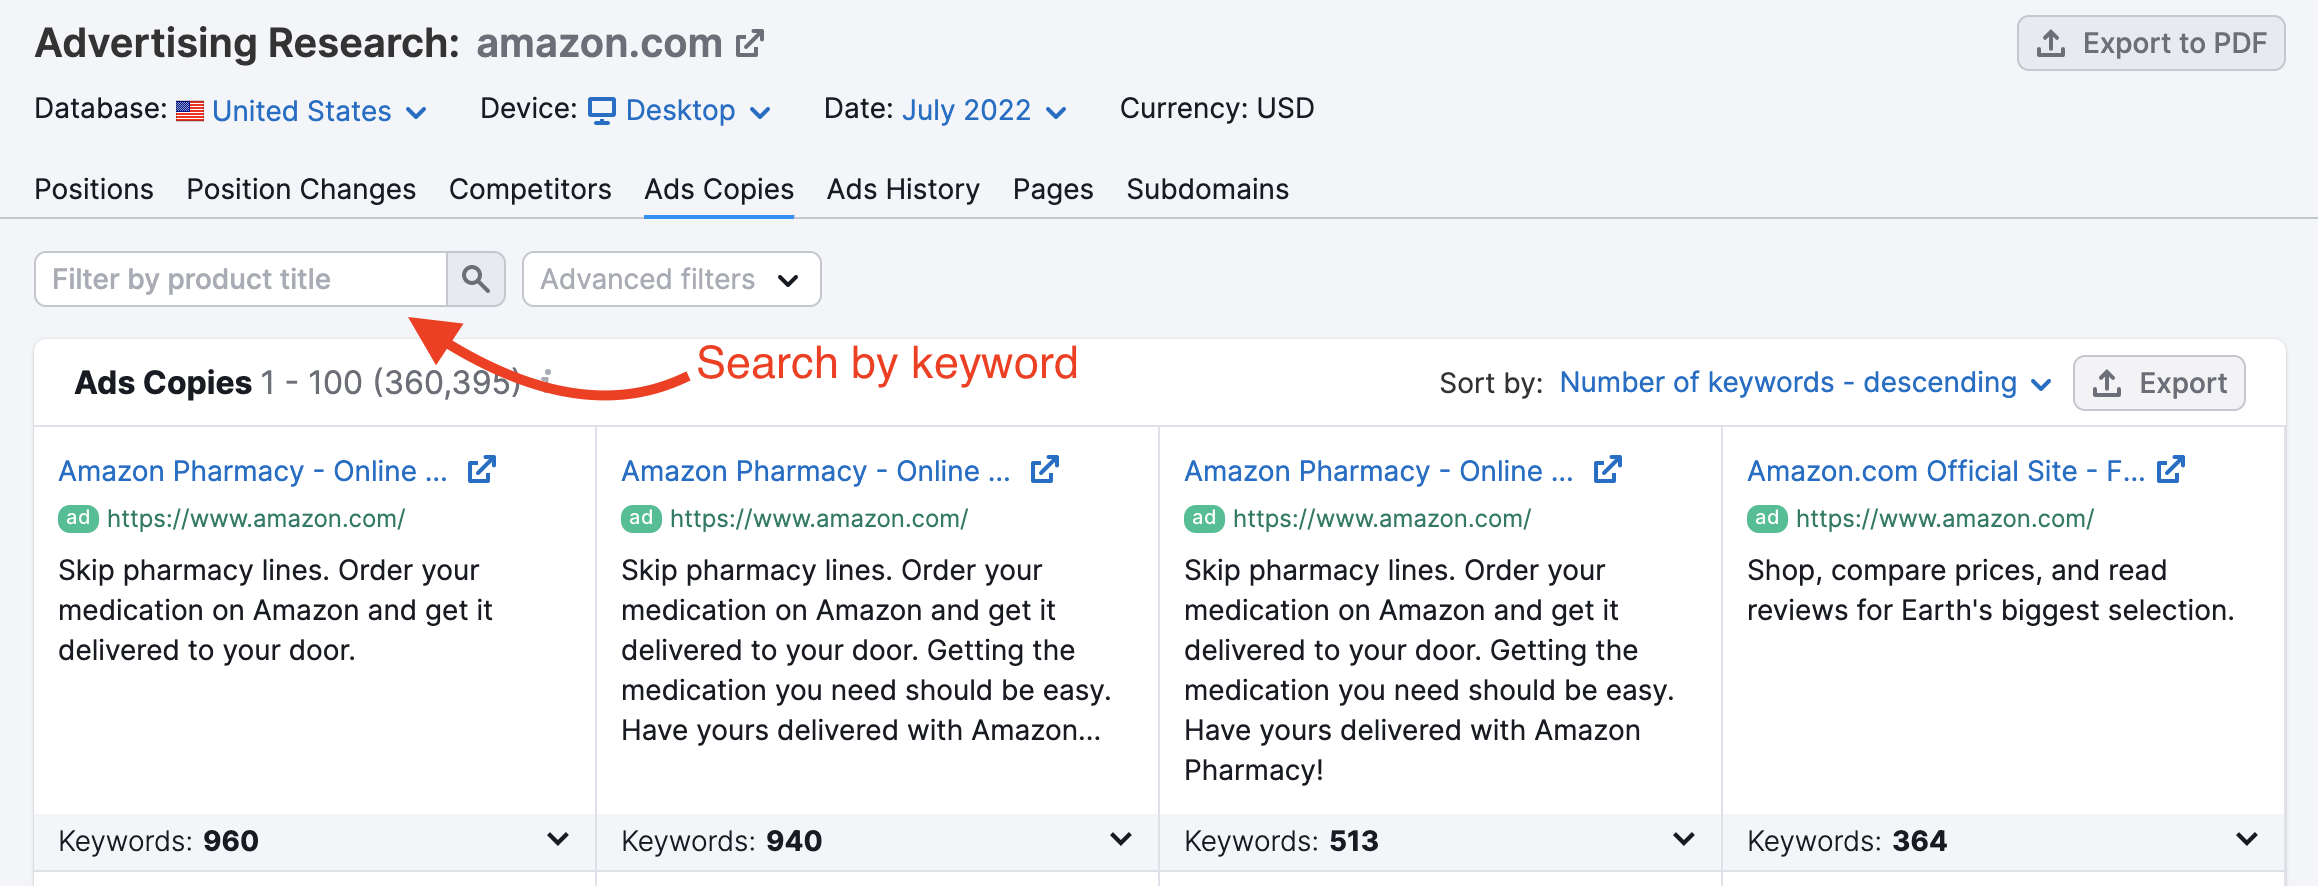 Advertising Research search by keyword